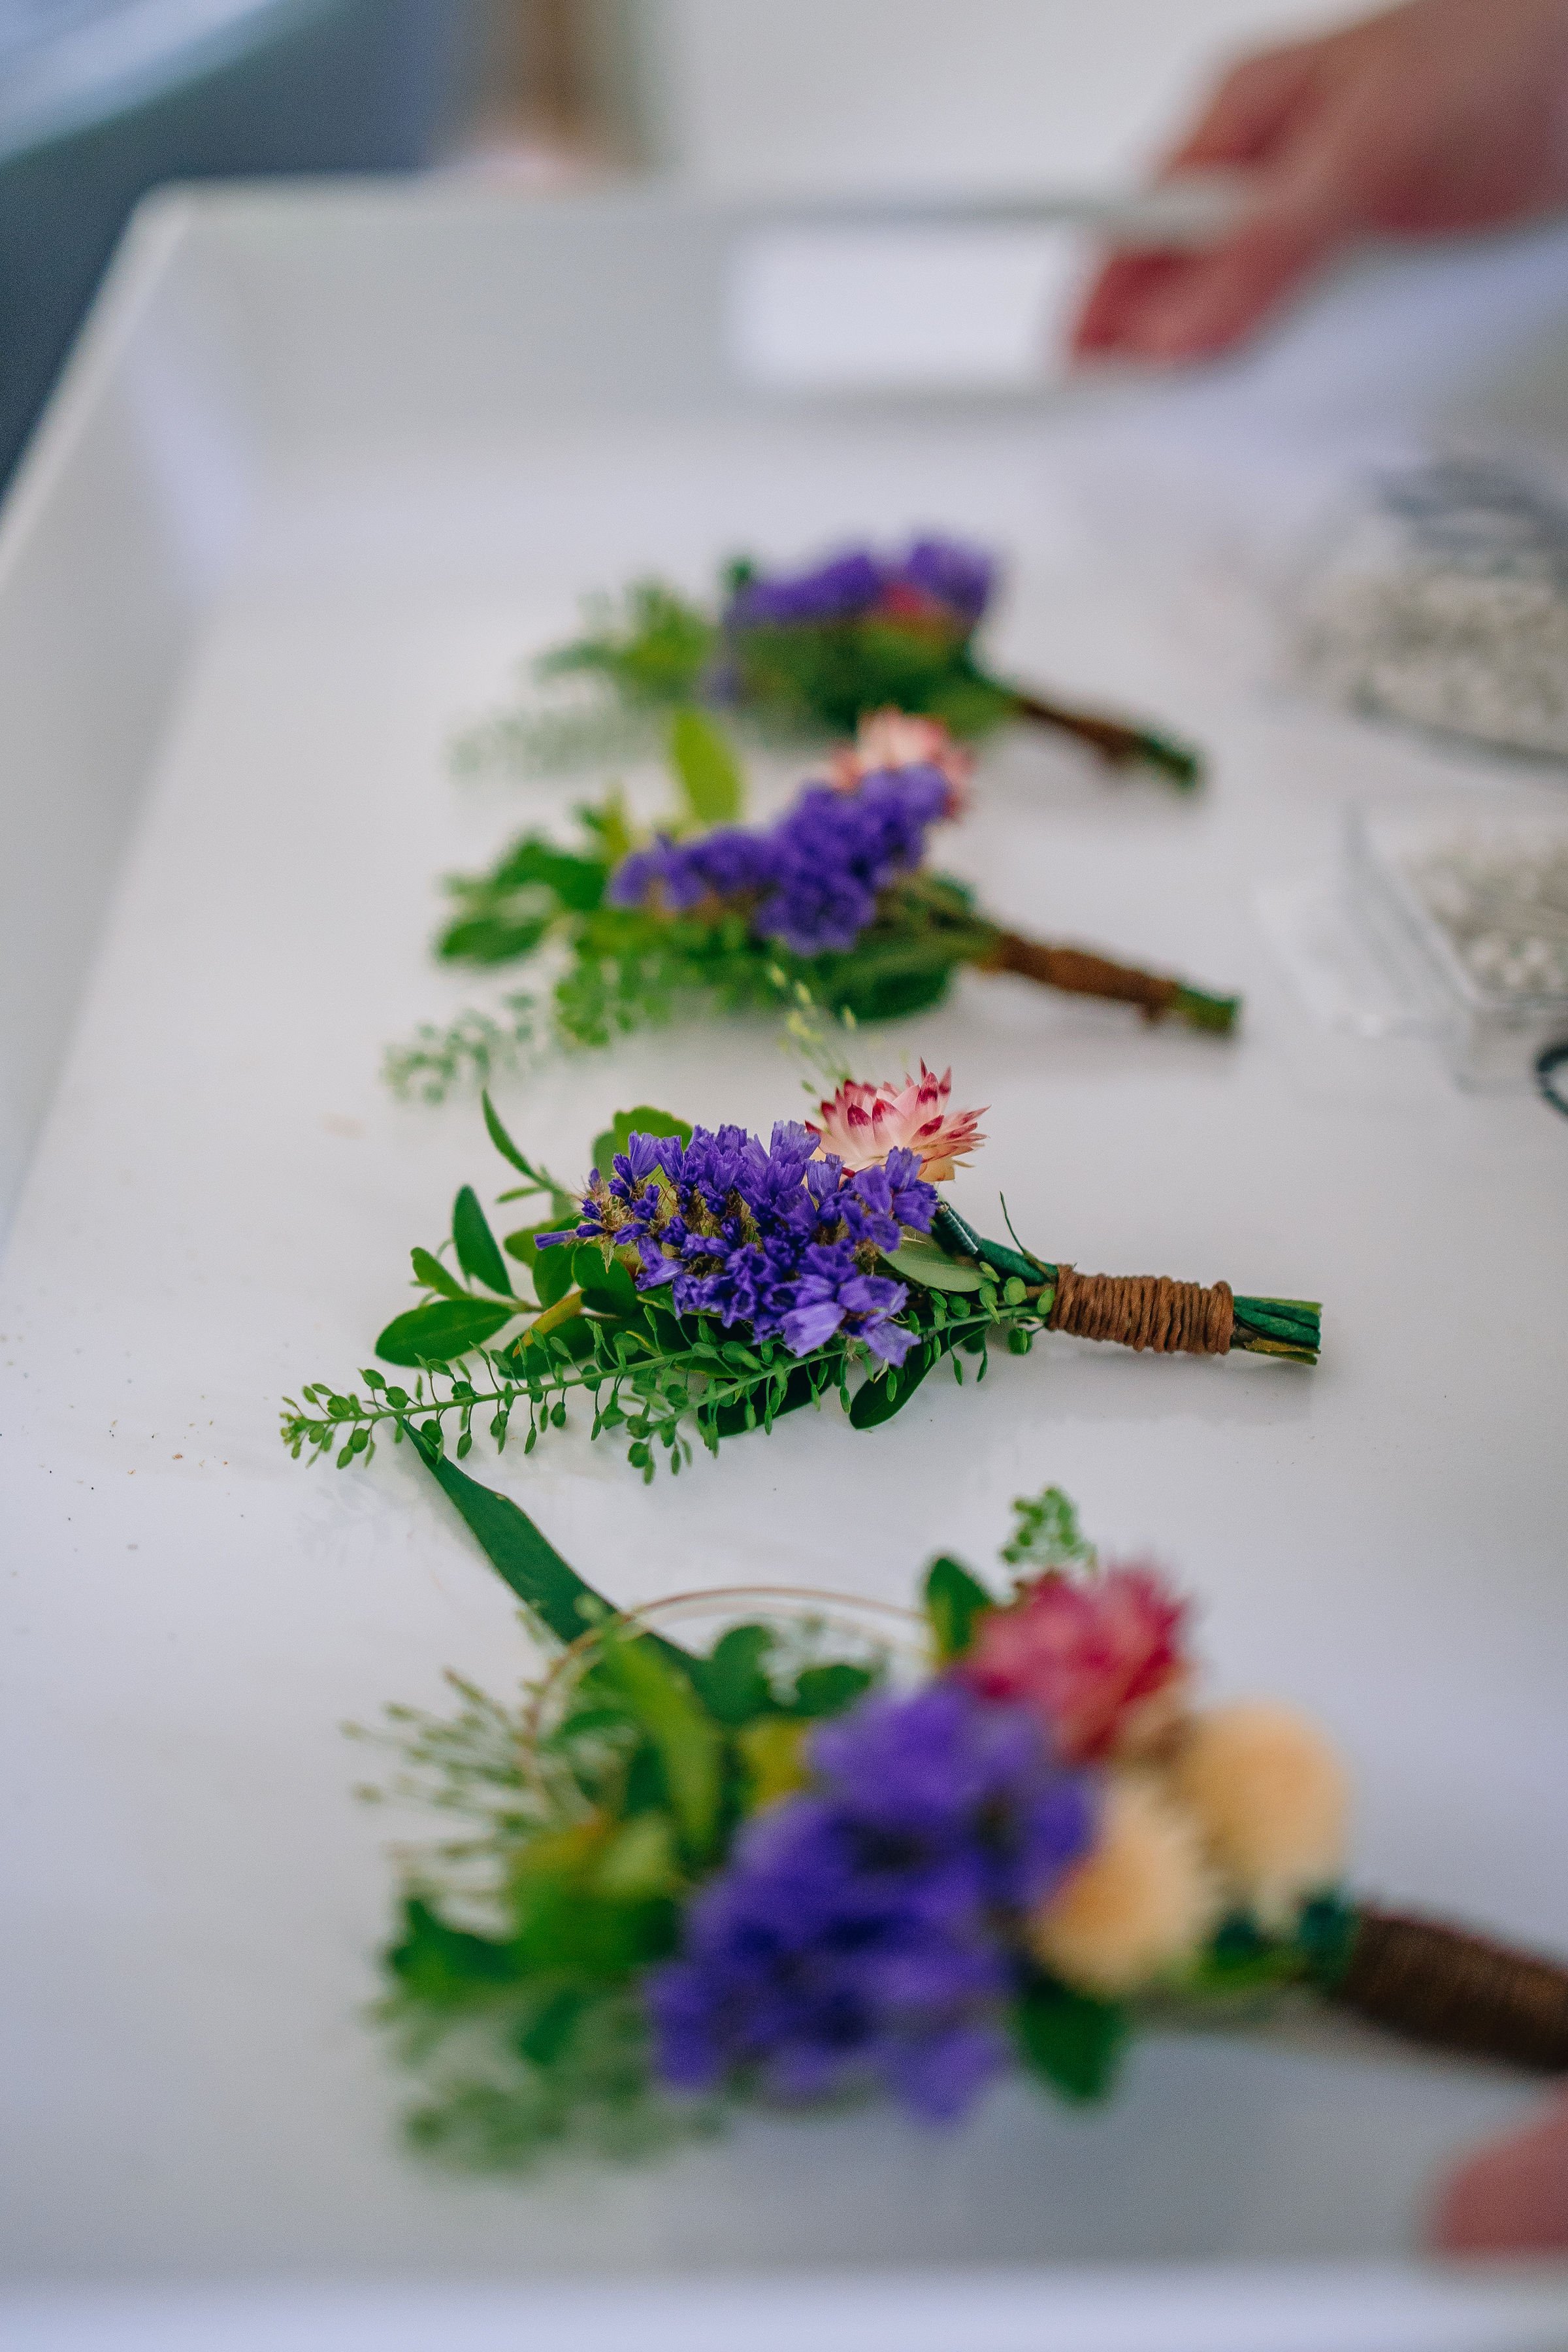 Boutonnieres for groom and groomsmen lined up on a white tray. Flowers are purple, white, and pink. Flowers by Plano, Texas florist Terra Cotta Blooms. Photo by Radiant Film &amp; Photo.